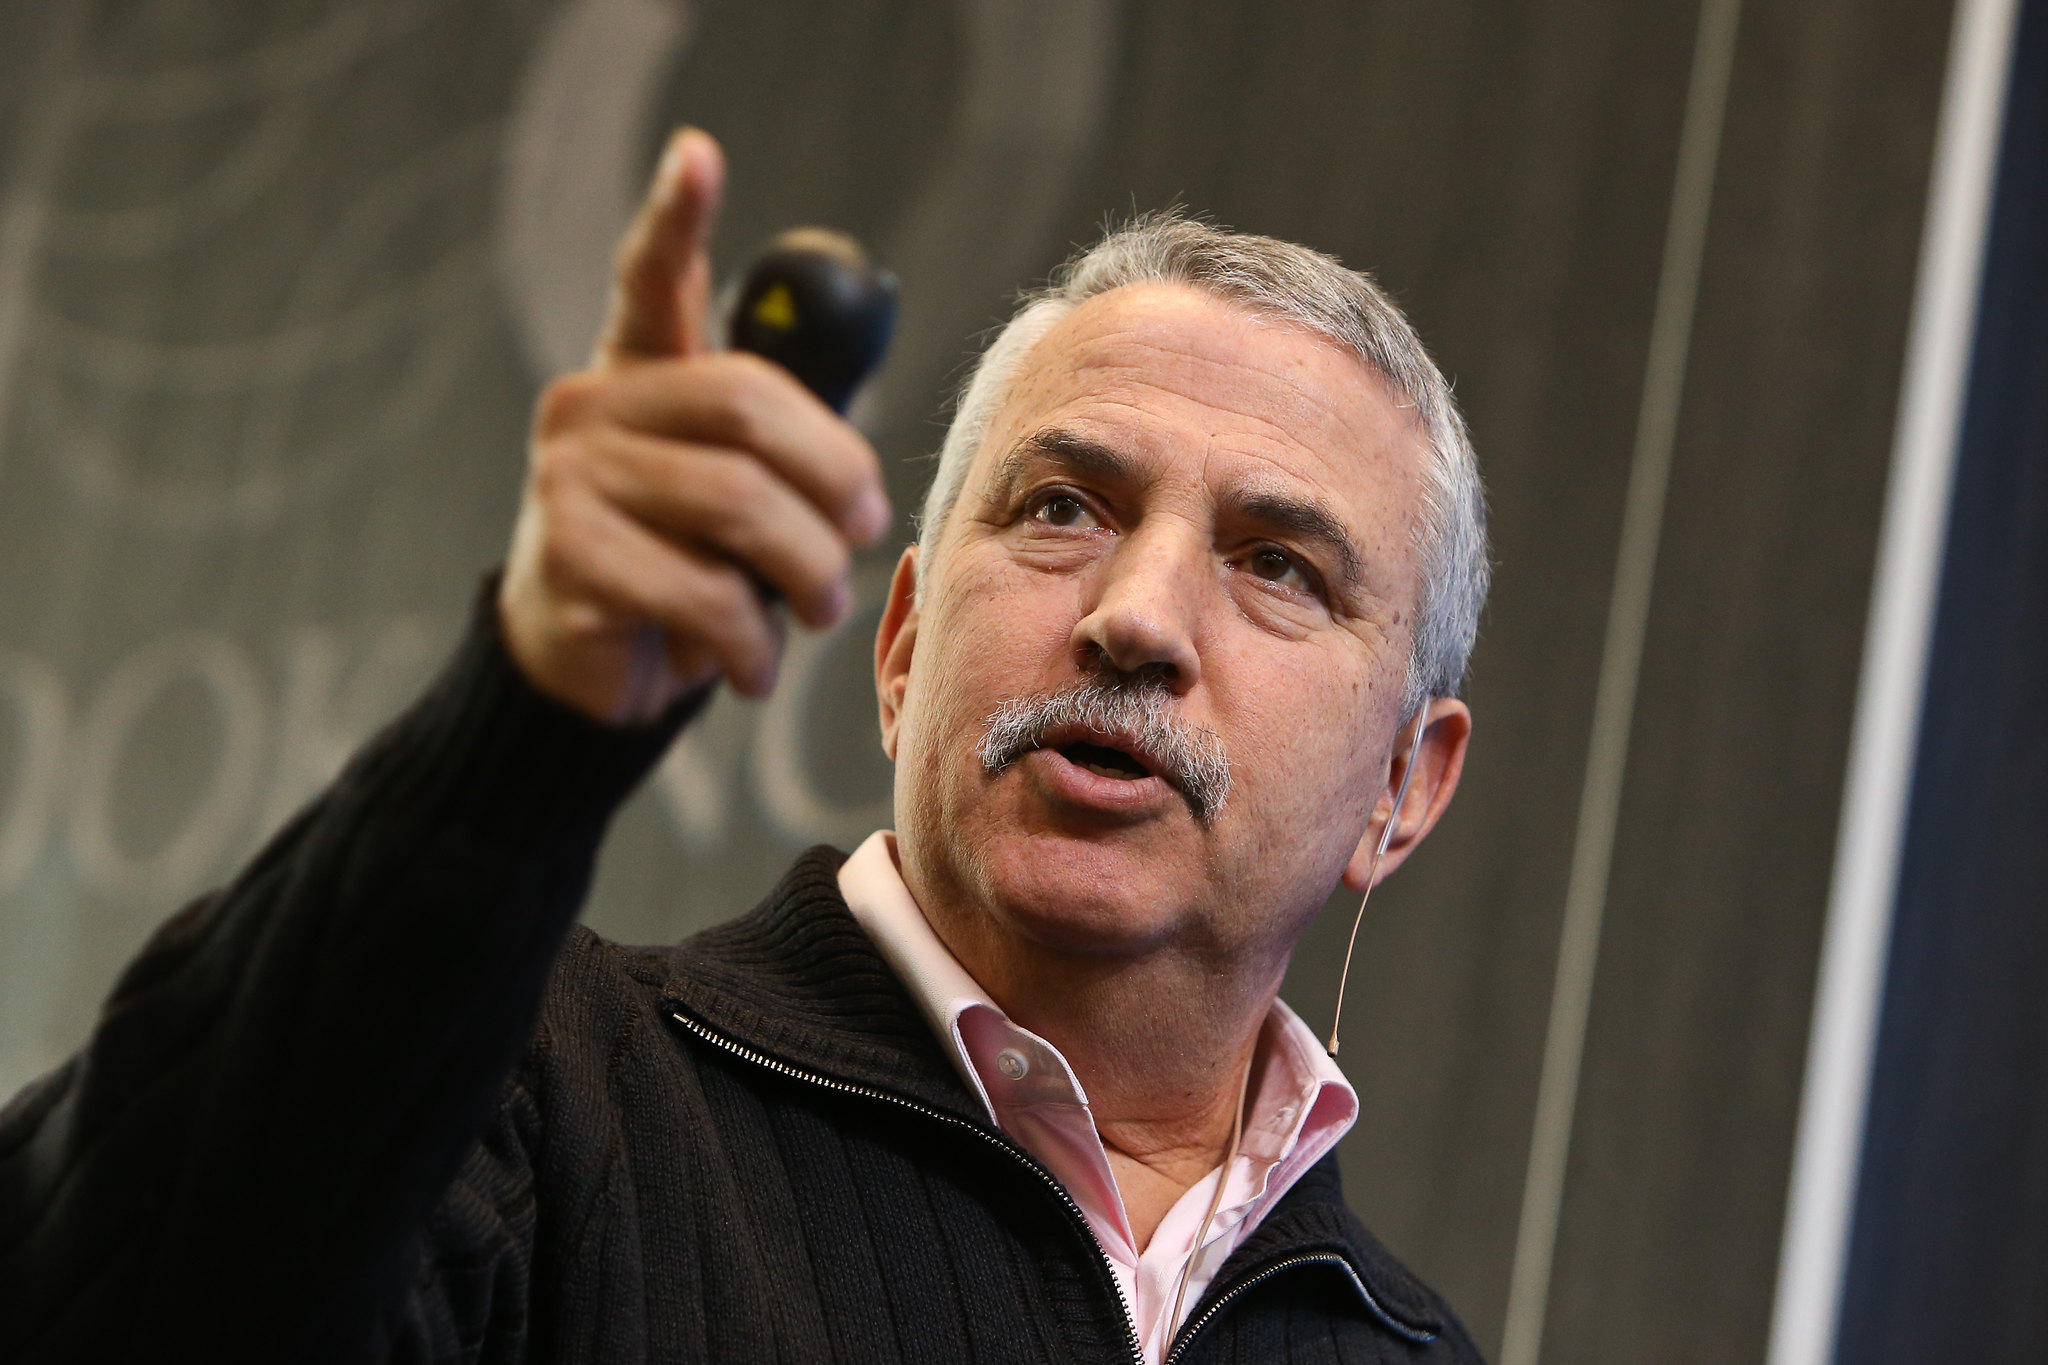 Thomas Friedman, New York Times columnist, speaking at Brookings about his new book, "Thank You For Being Late: An Optimist’s Guide to Thriving in the Age of Accelerations," December 15, 2016. (Brookings Institution/CC BY-NC-ND 2.0)